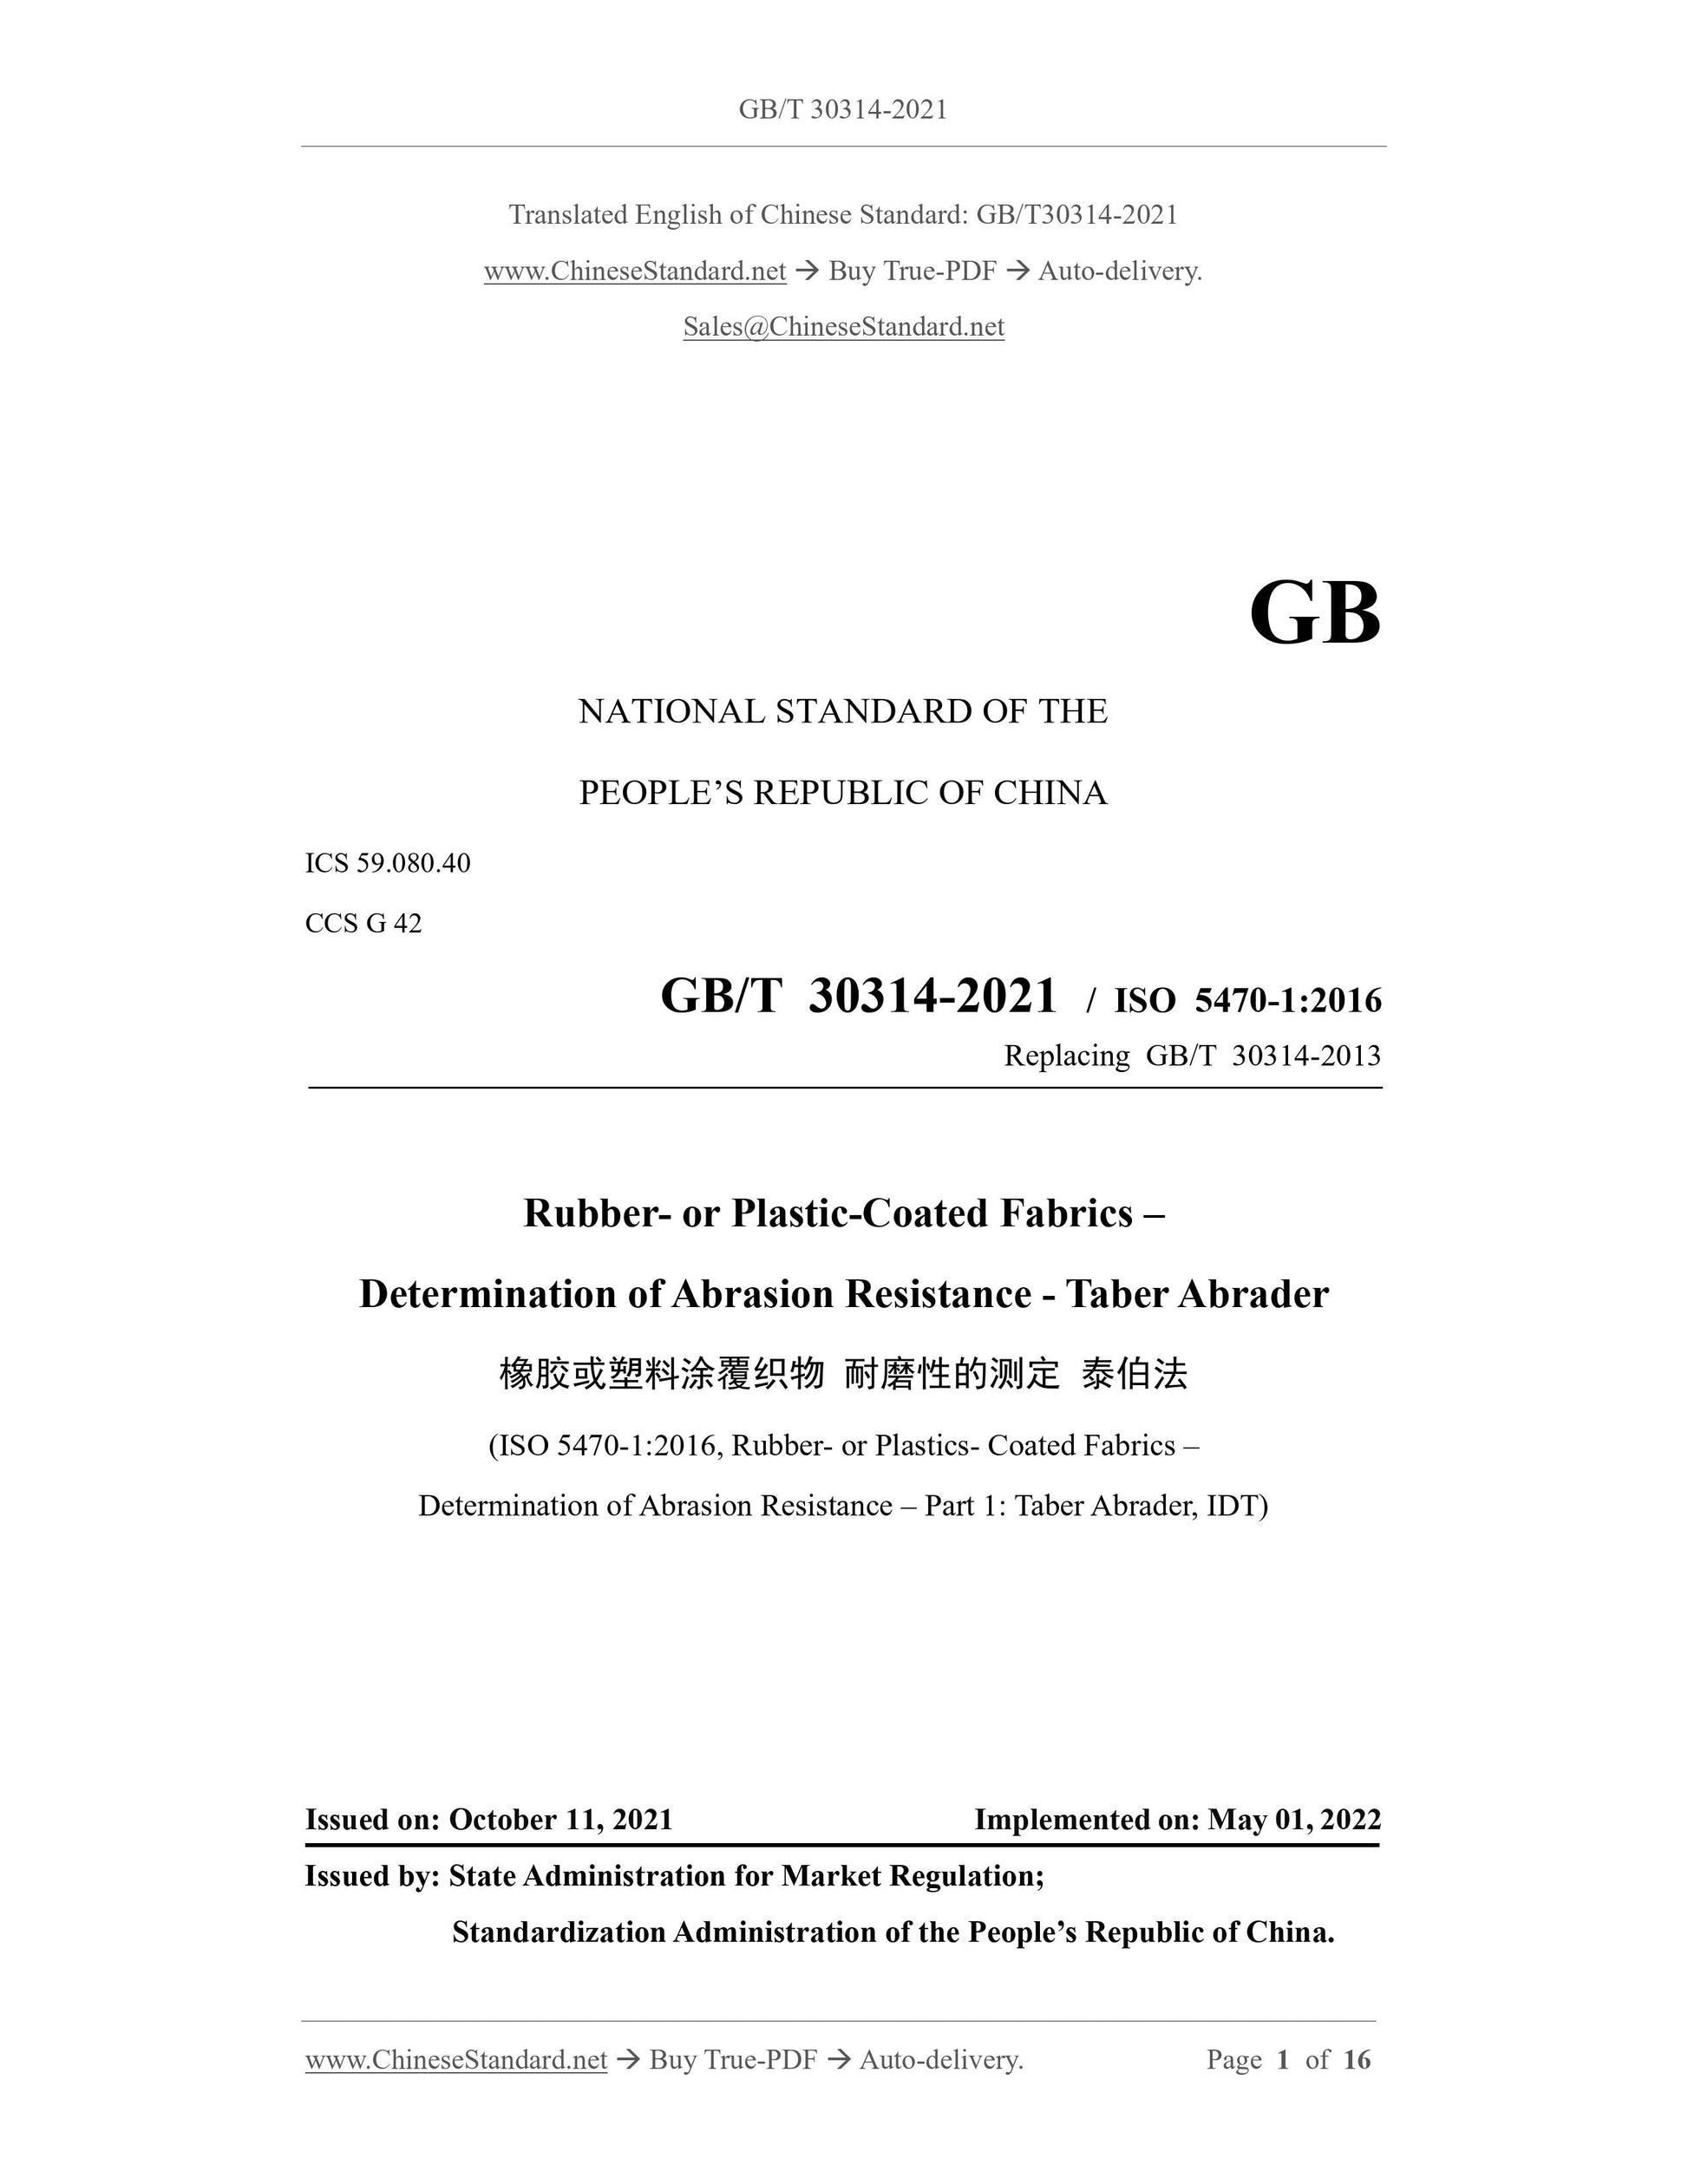 GB/T 30314-2021 Page 1